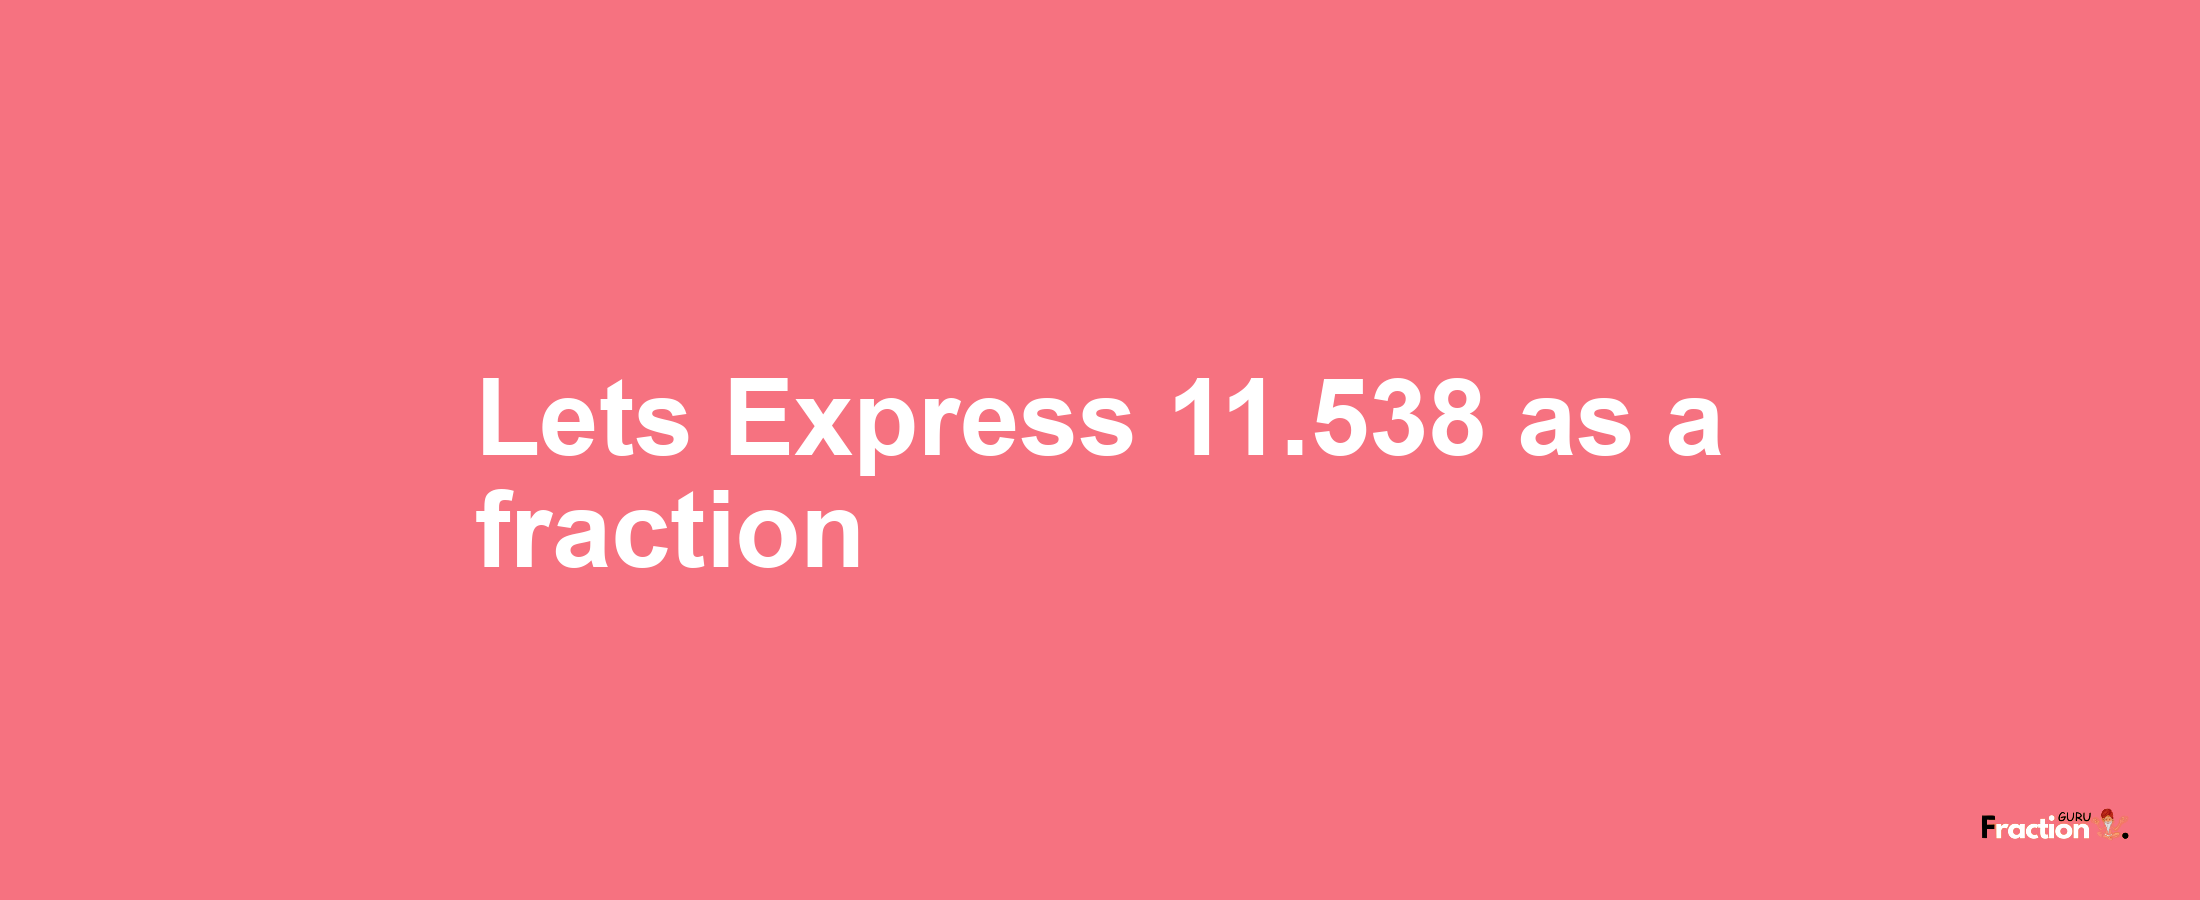 Lets Express 11.538 as afraction